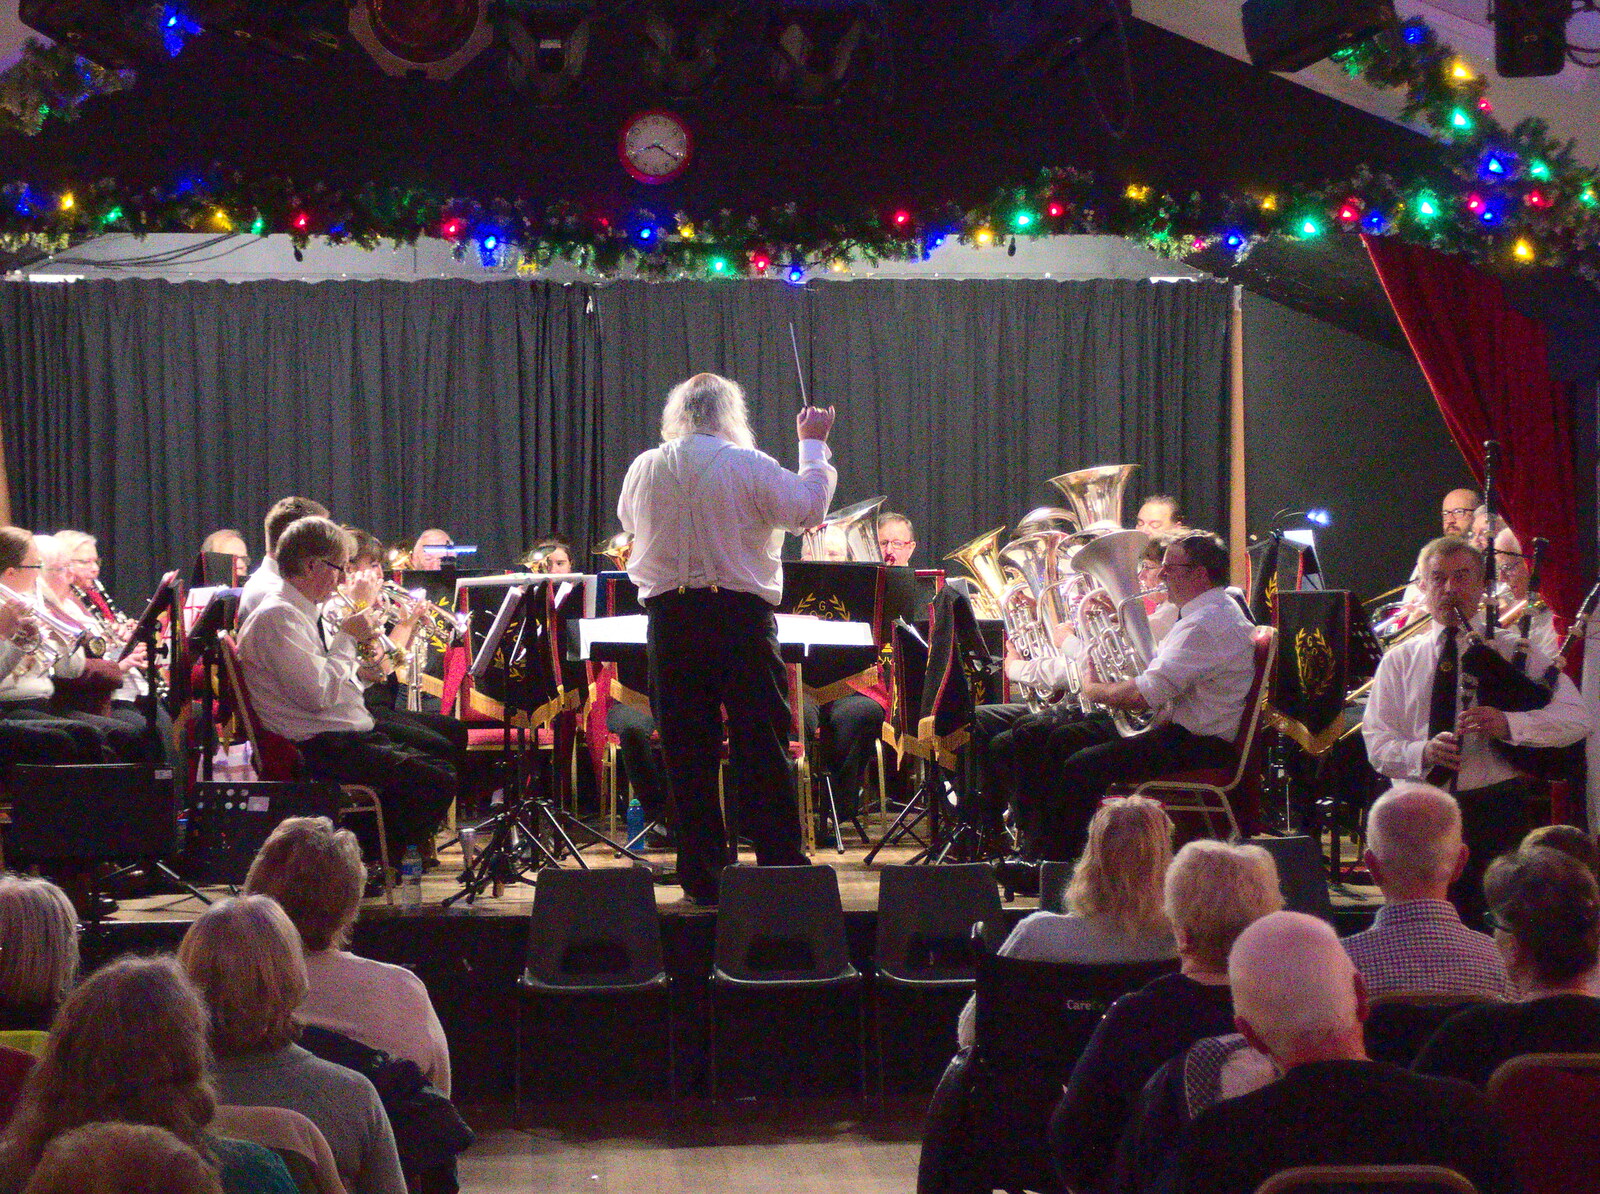 The senior band plays from The Gislingham Silver Band Christmas Concert, Gislingham, Suffolk - 11th December 2018